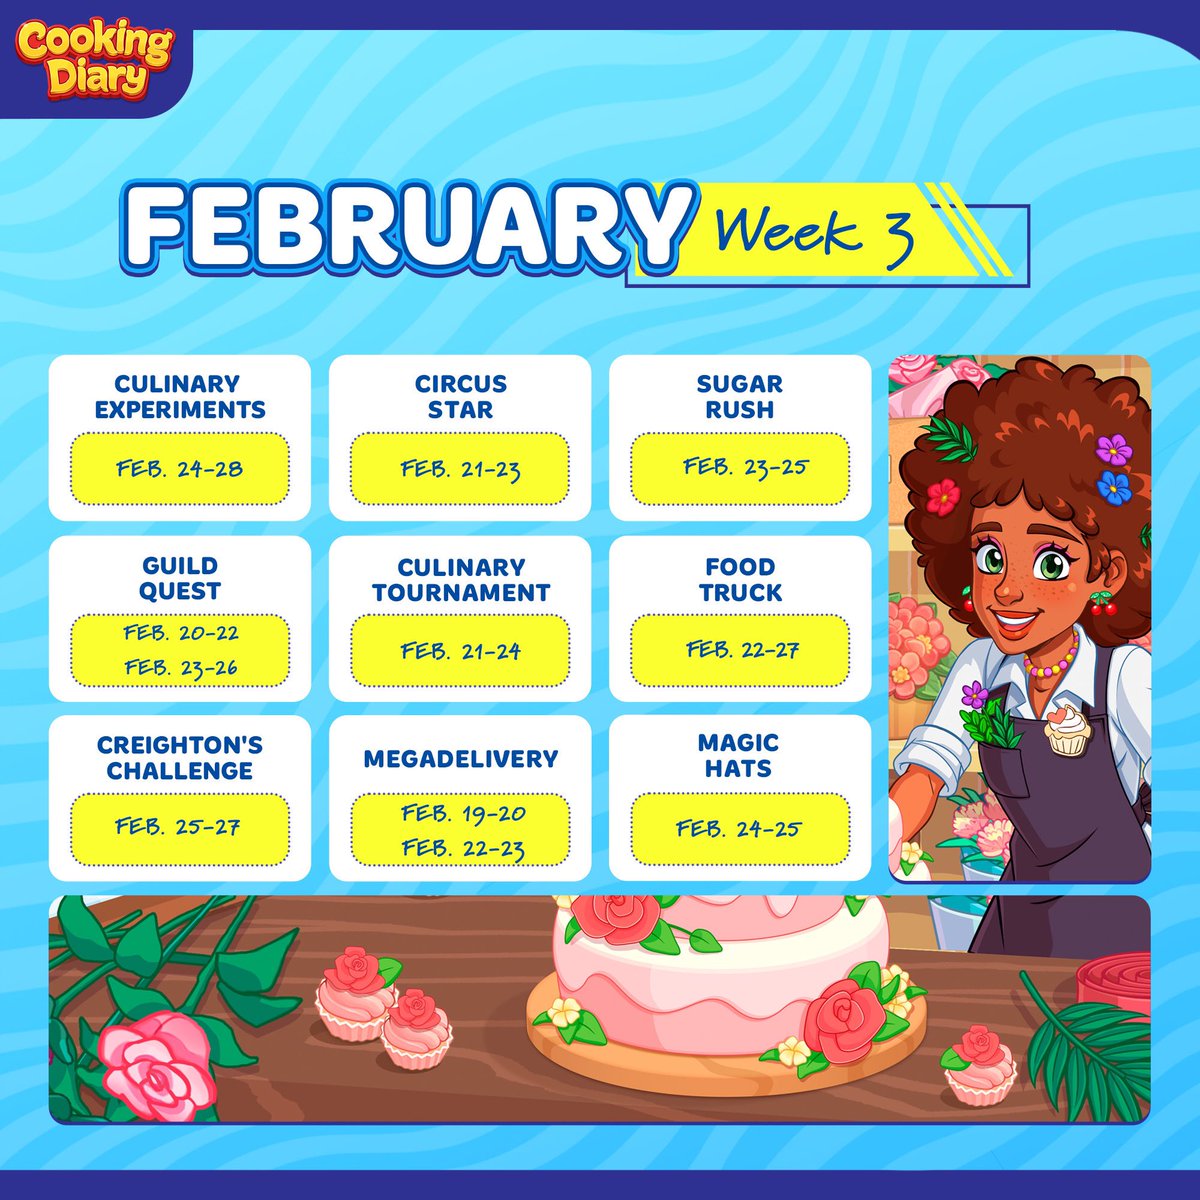 New weekly event calendar! Share it with your guildmates and get ready for an exciting experience. 🗓️🎉 